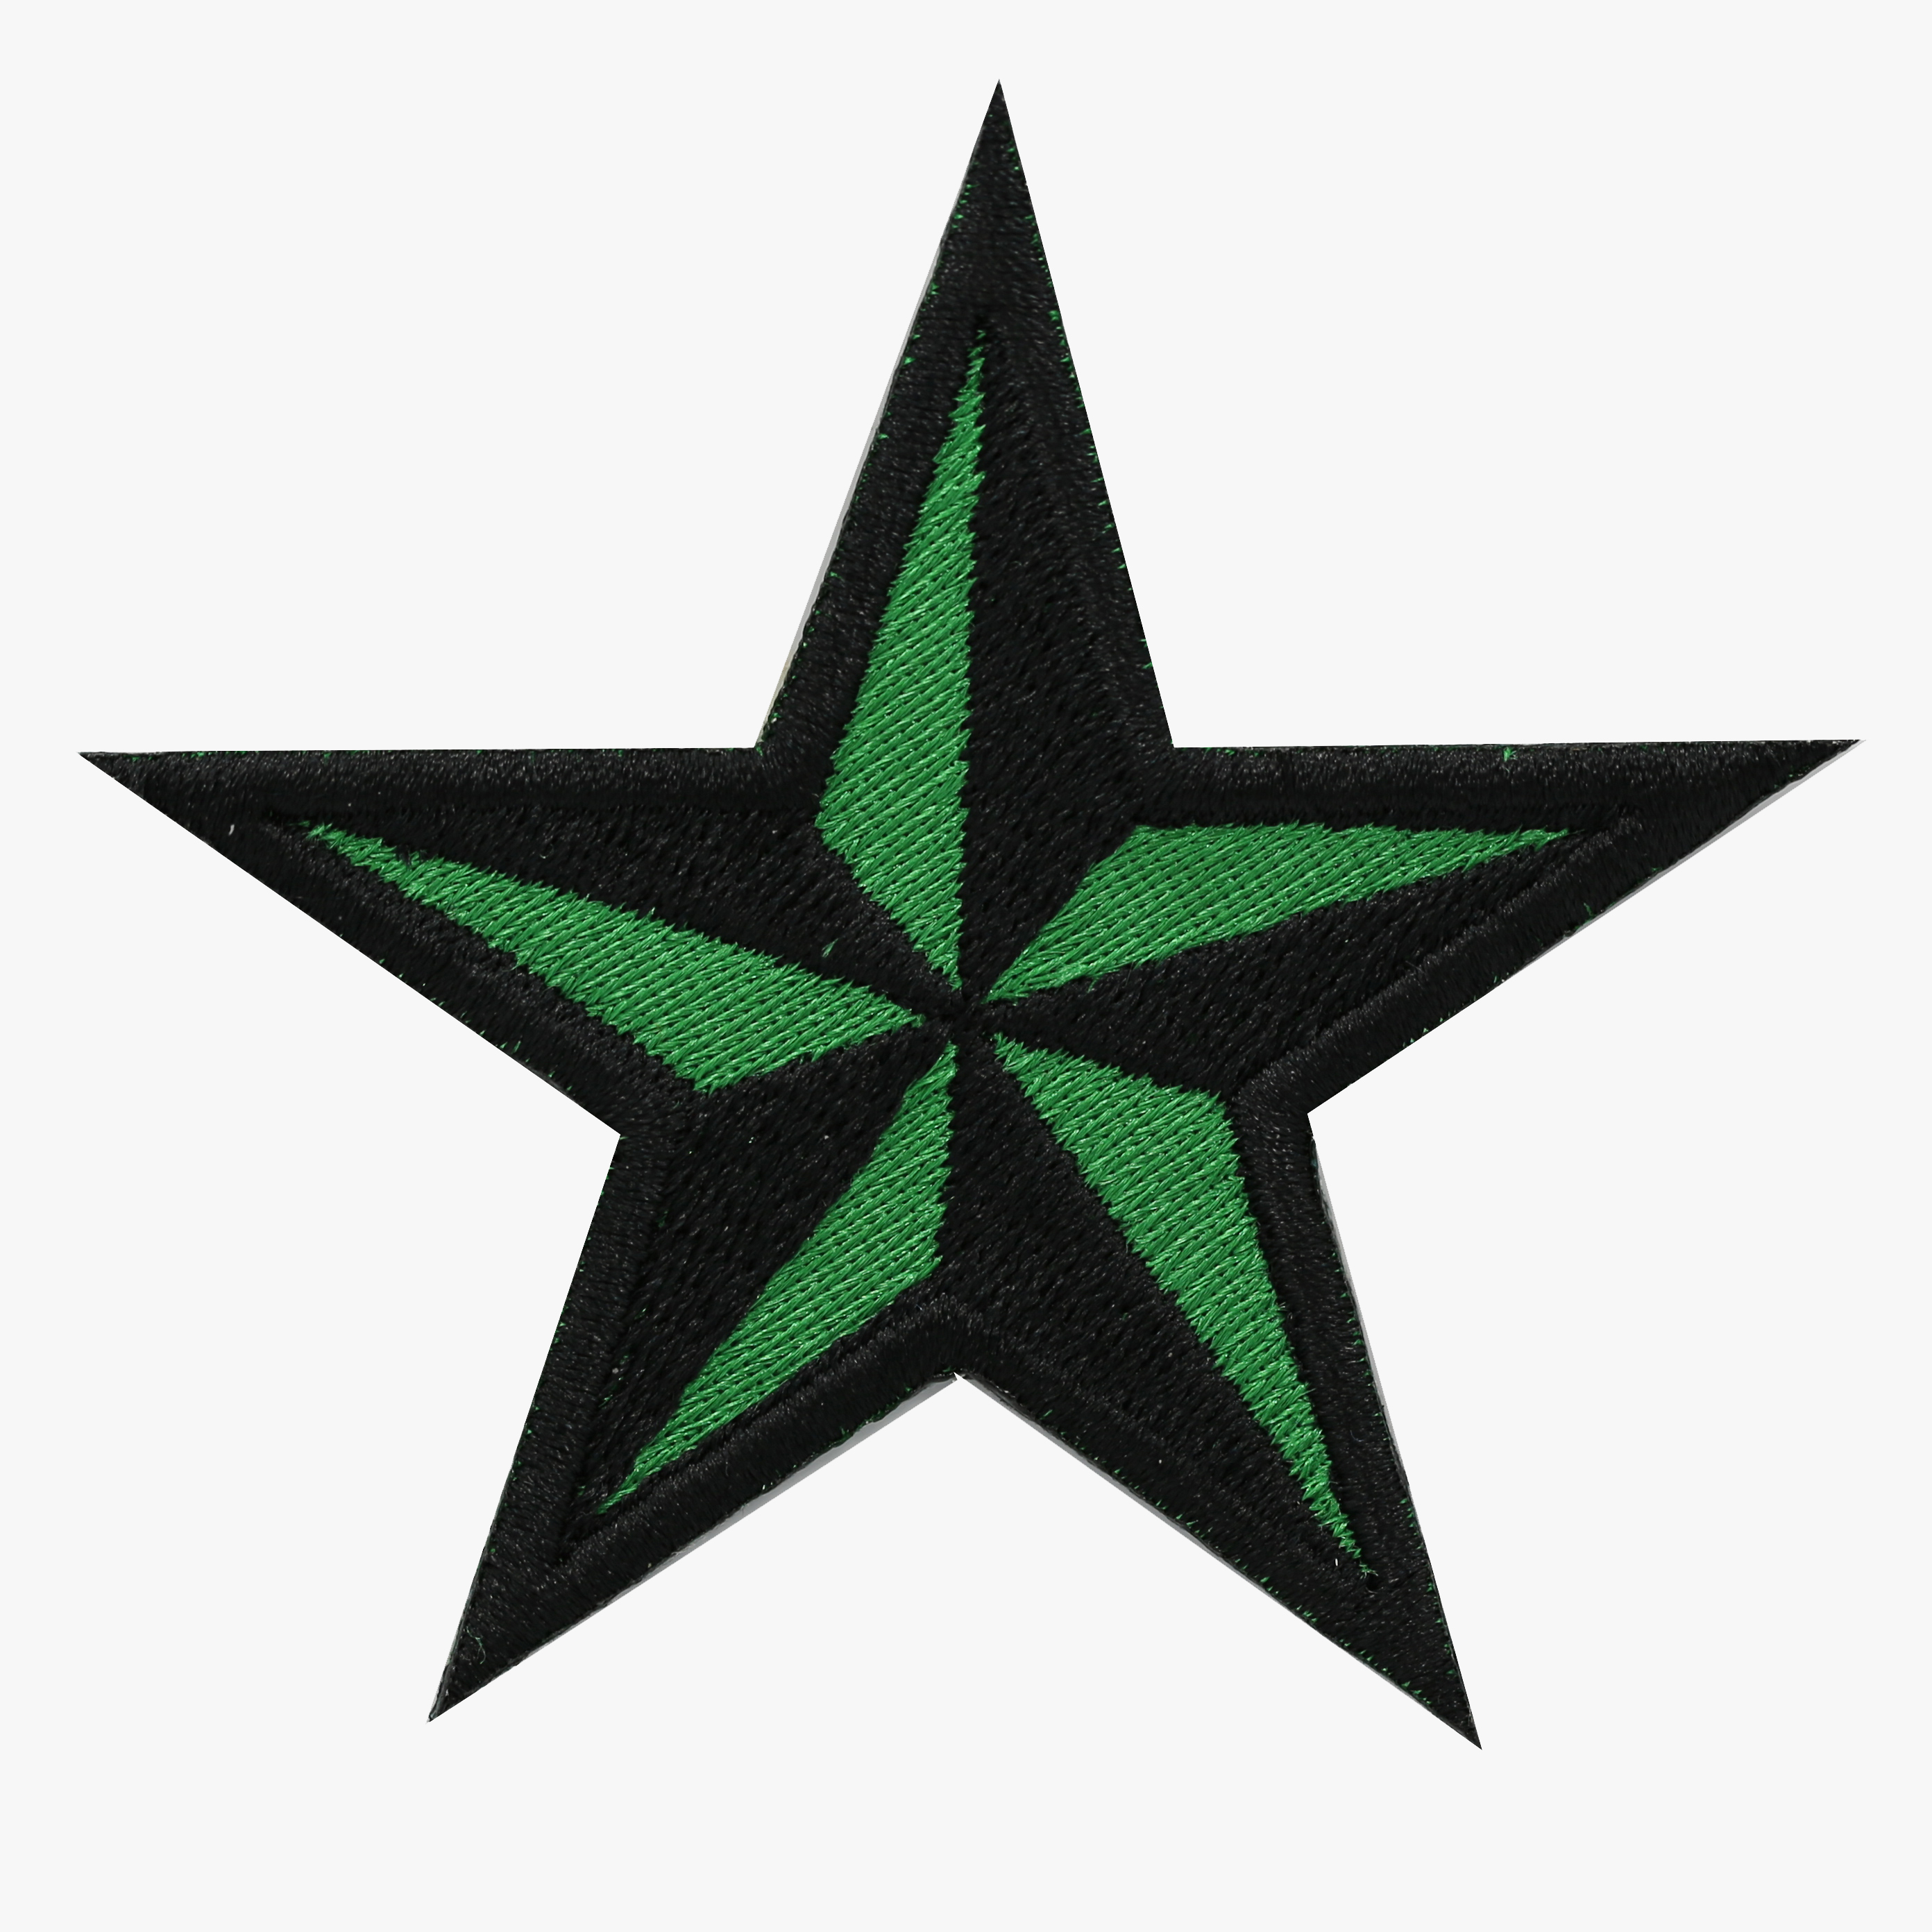 New NAUTICAL STAR Embroidered PATCH